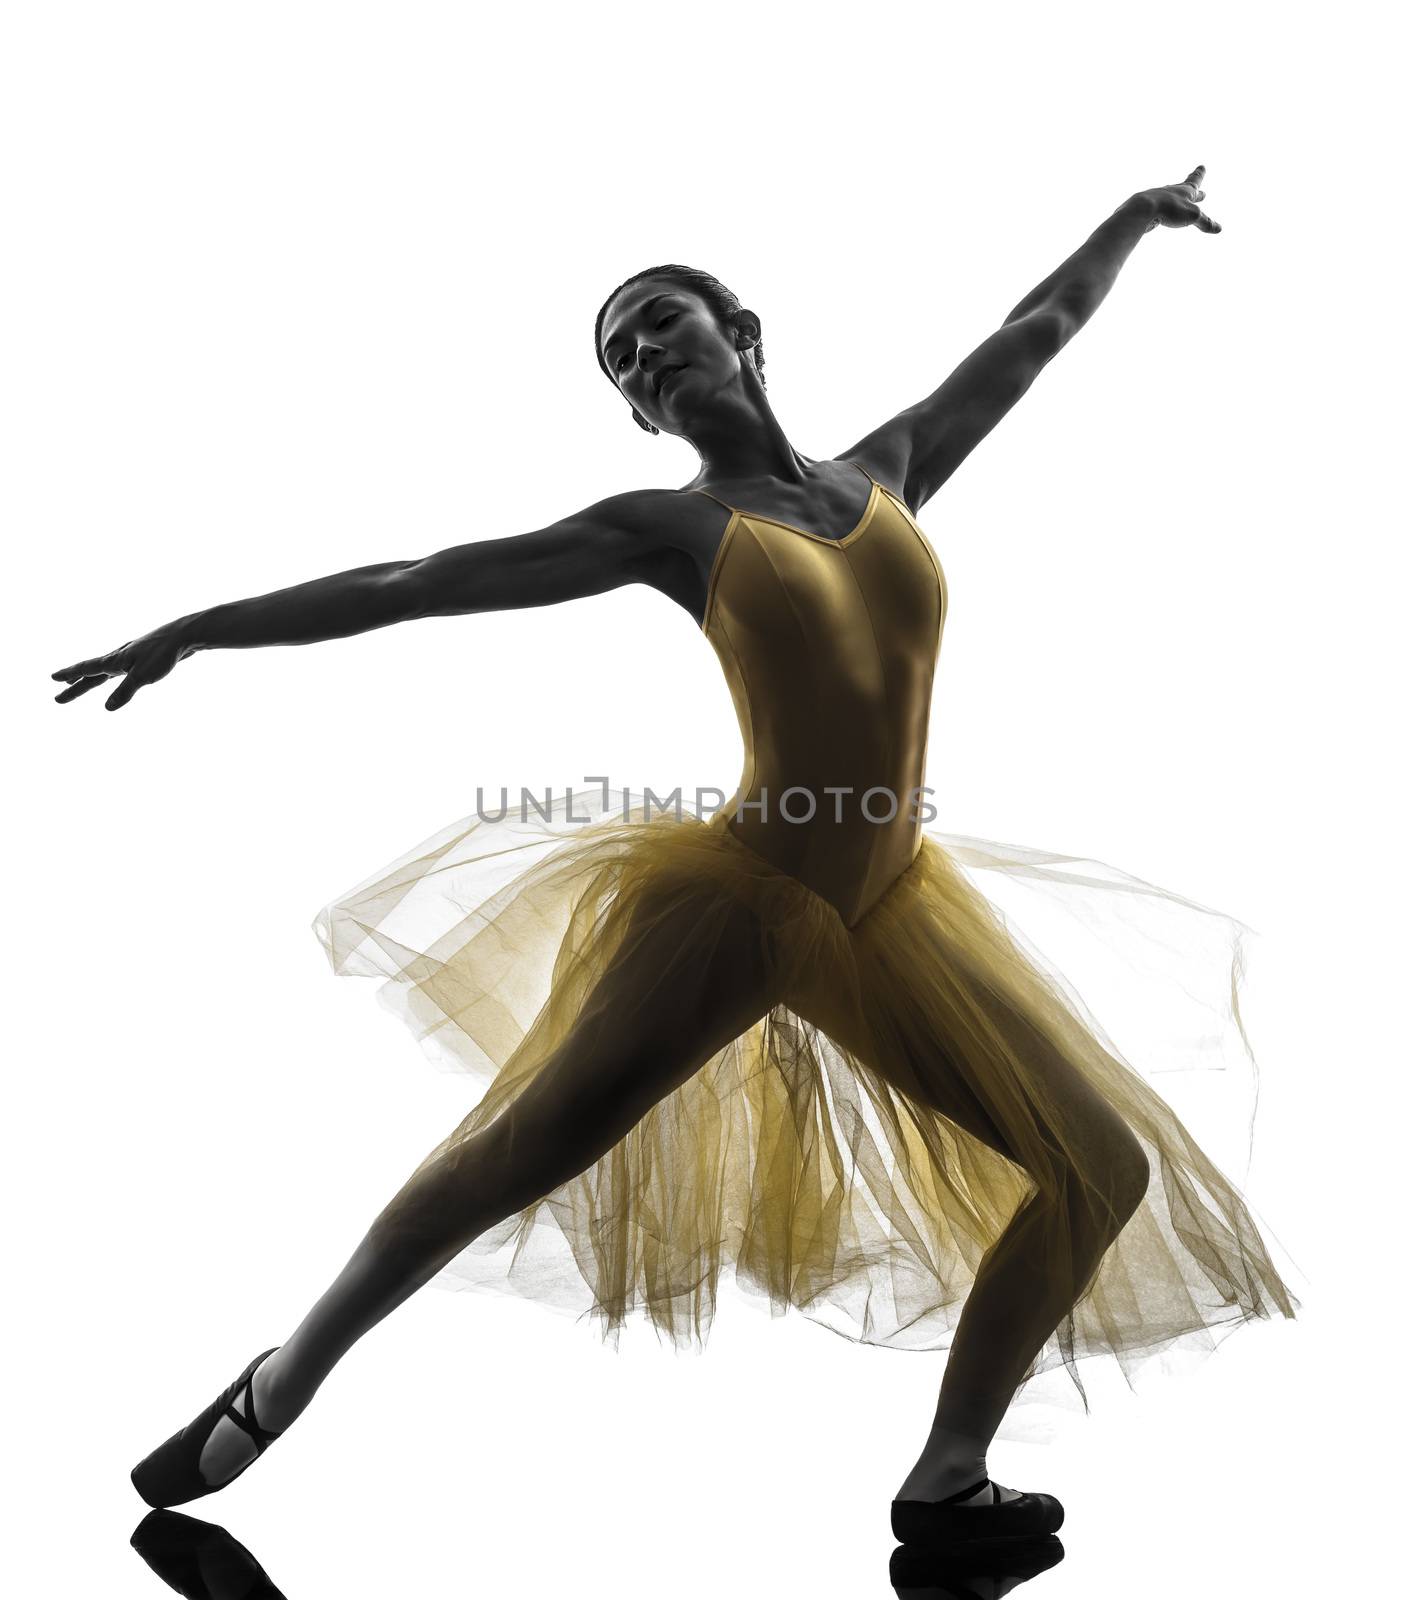 one woman ballerina ballet dancer dancing in silhouette on white background